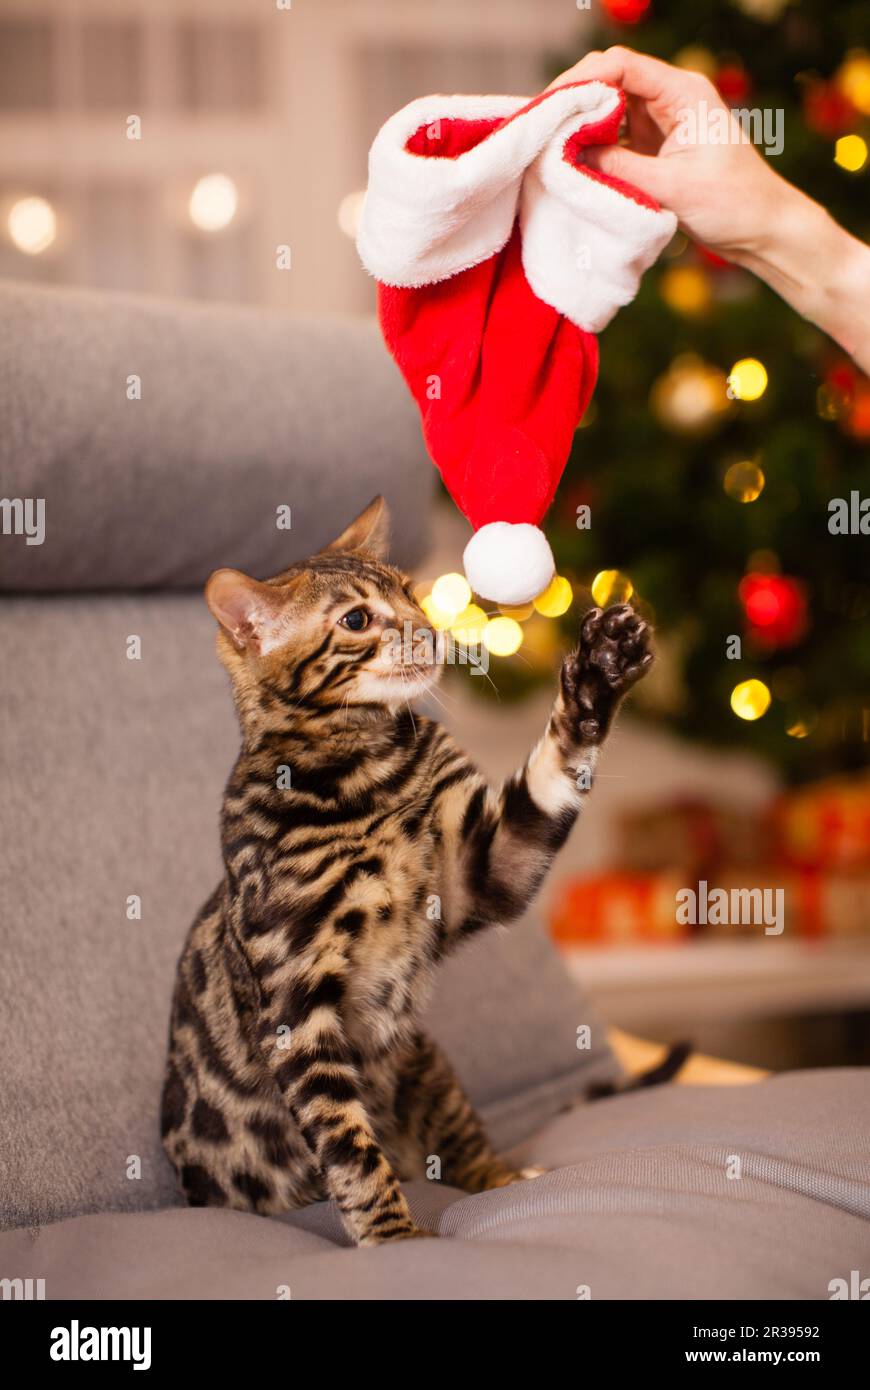 Christmas cat in red Santa Claus hat Stock Photo